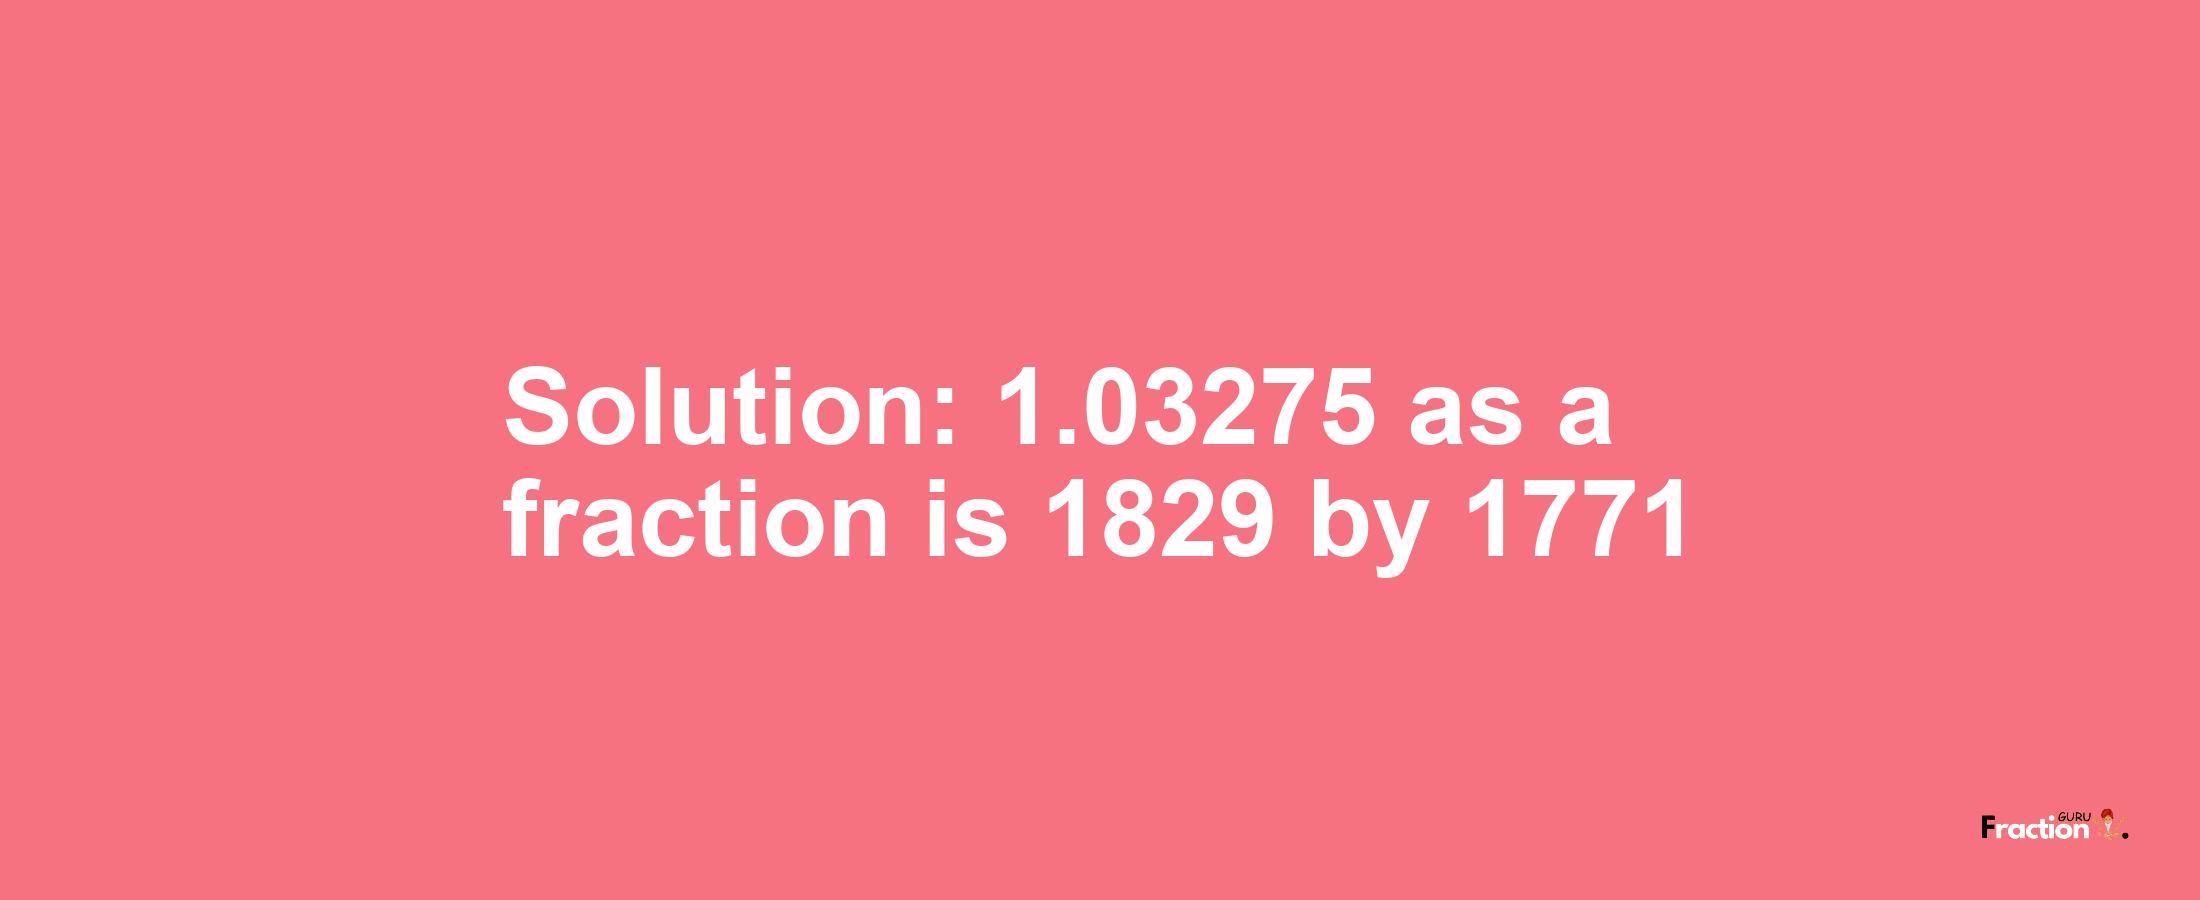 Solution:1.03275 as a fraction is 1829/1771